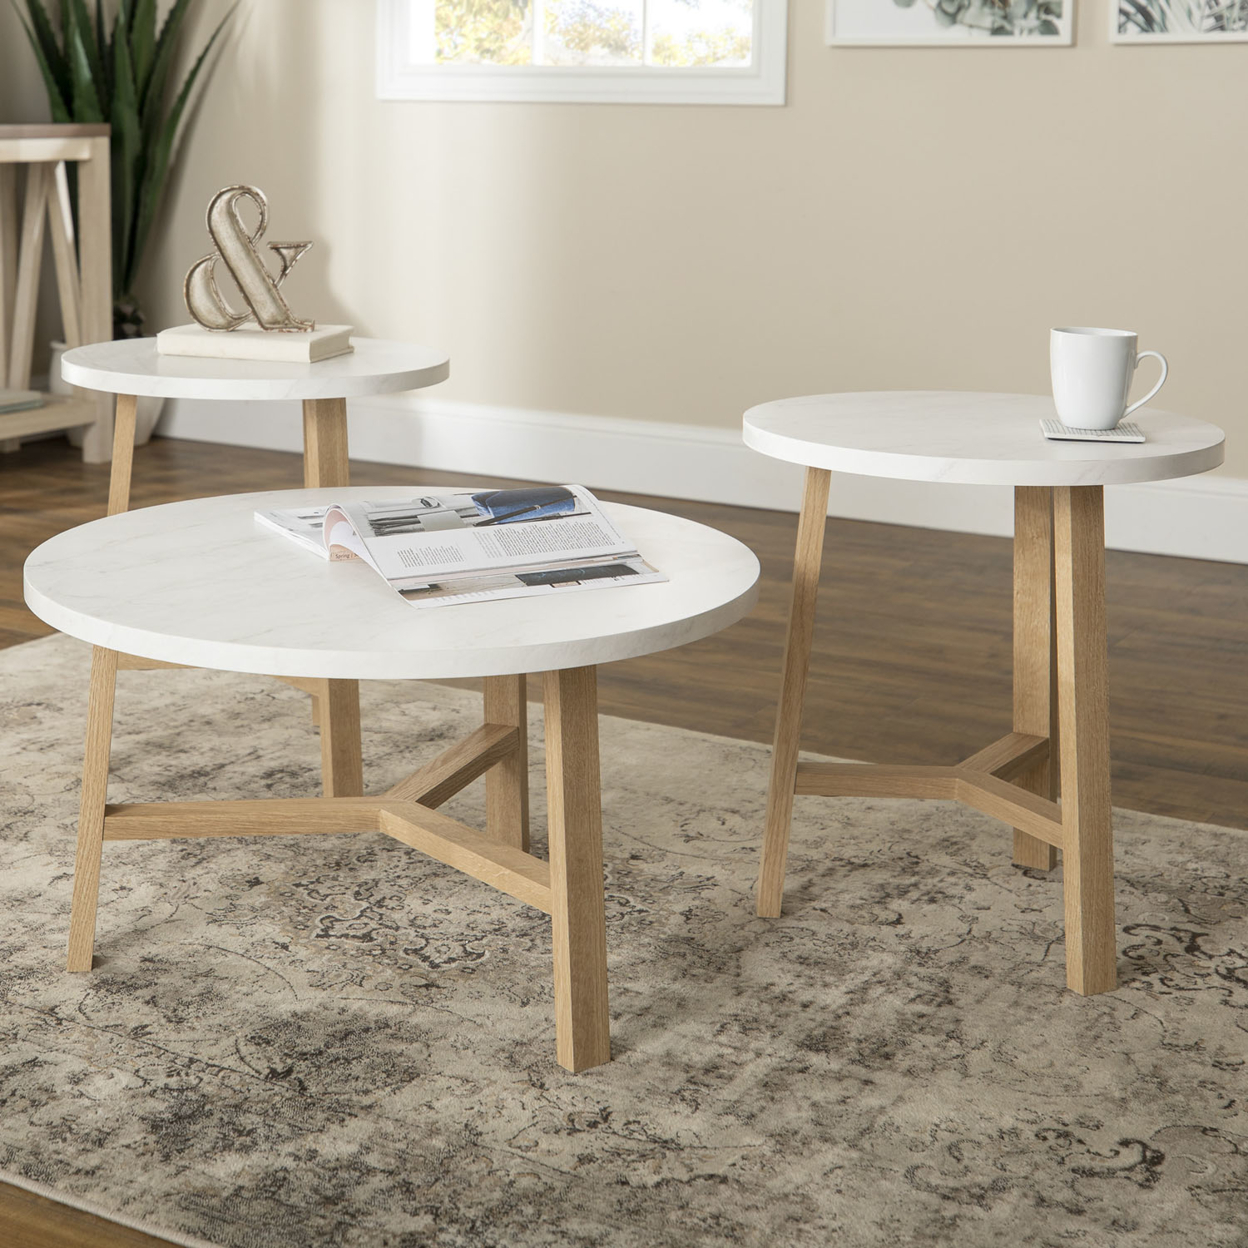 Buy 3-Piece Mid Century Modern Accent Table Set - Faux ...